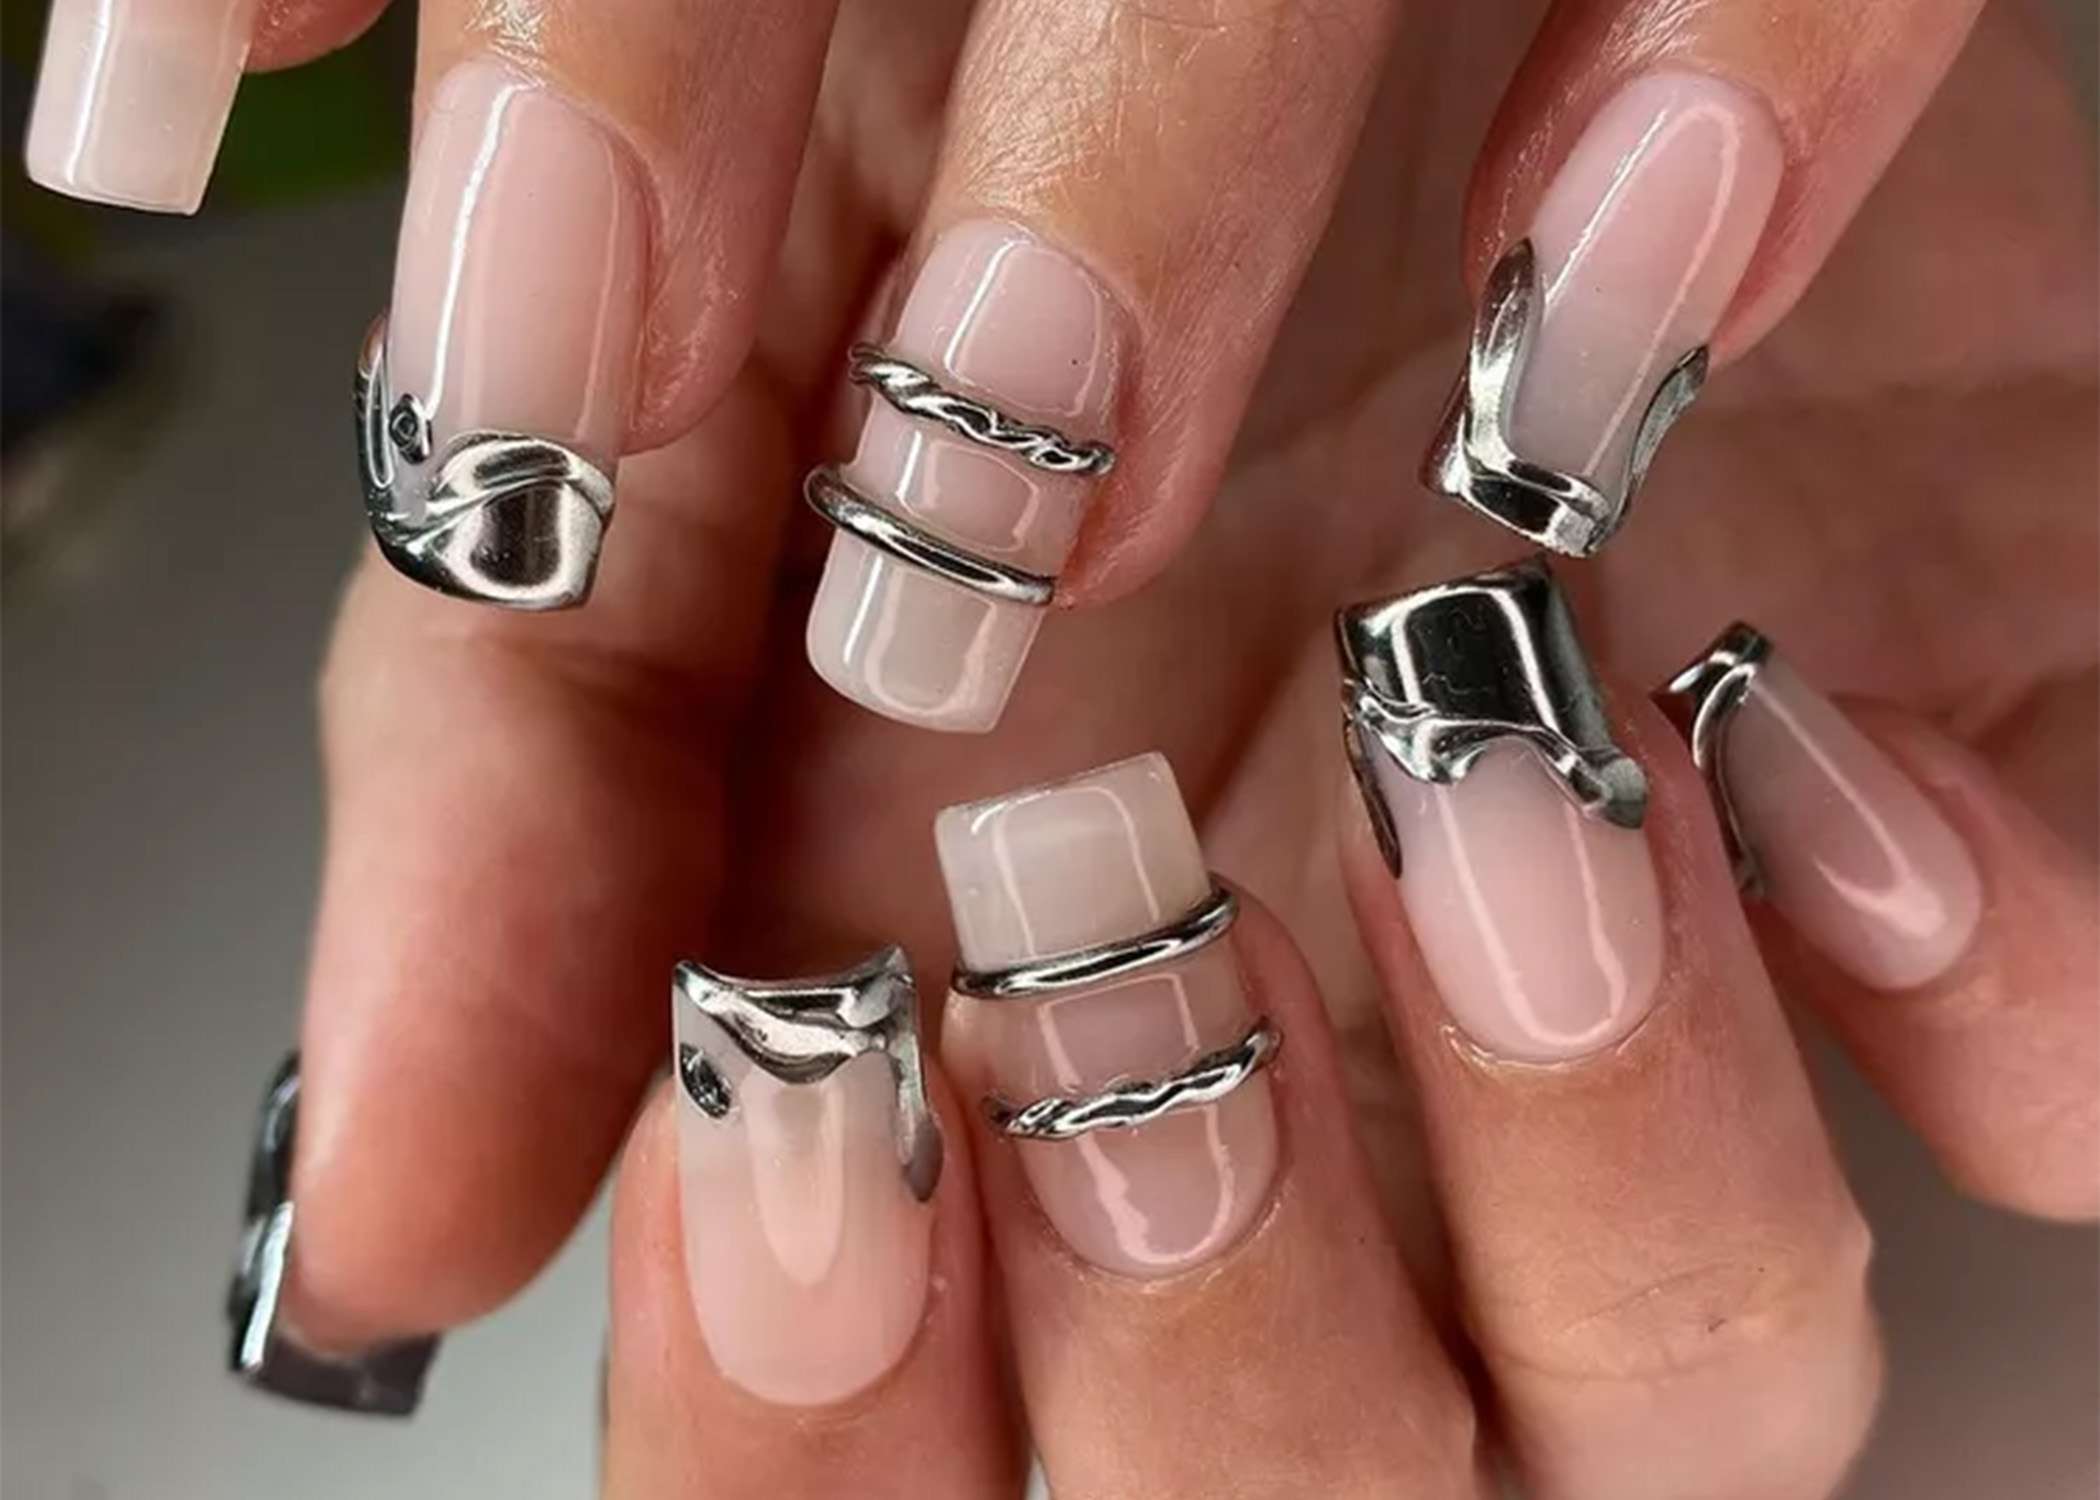 30 metallic nail designs for a luxe and edgy manicure